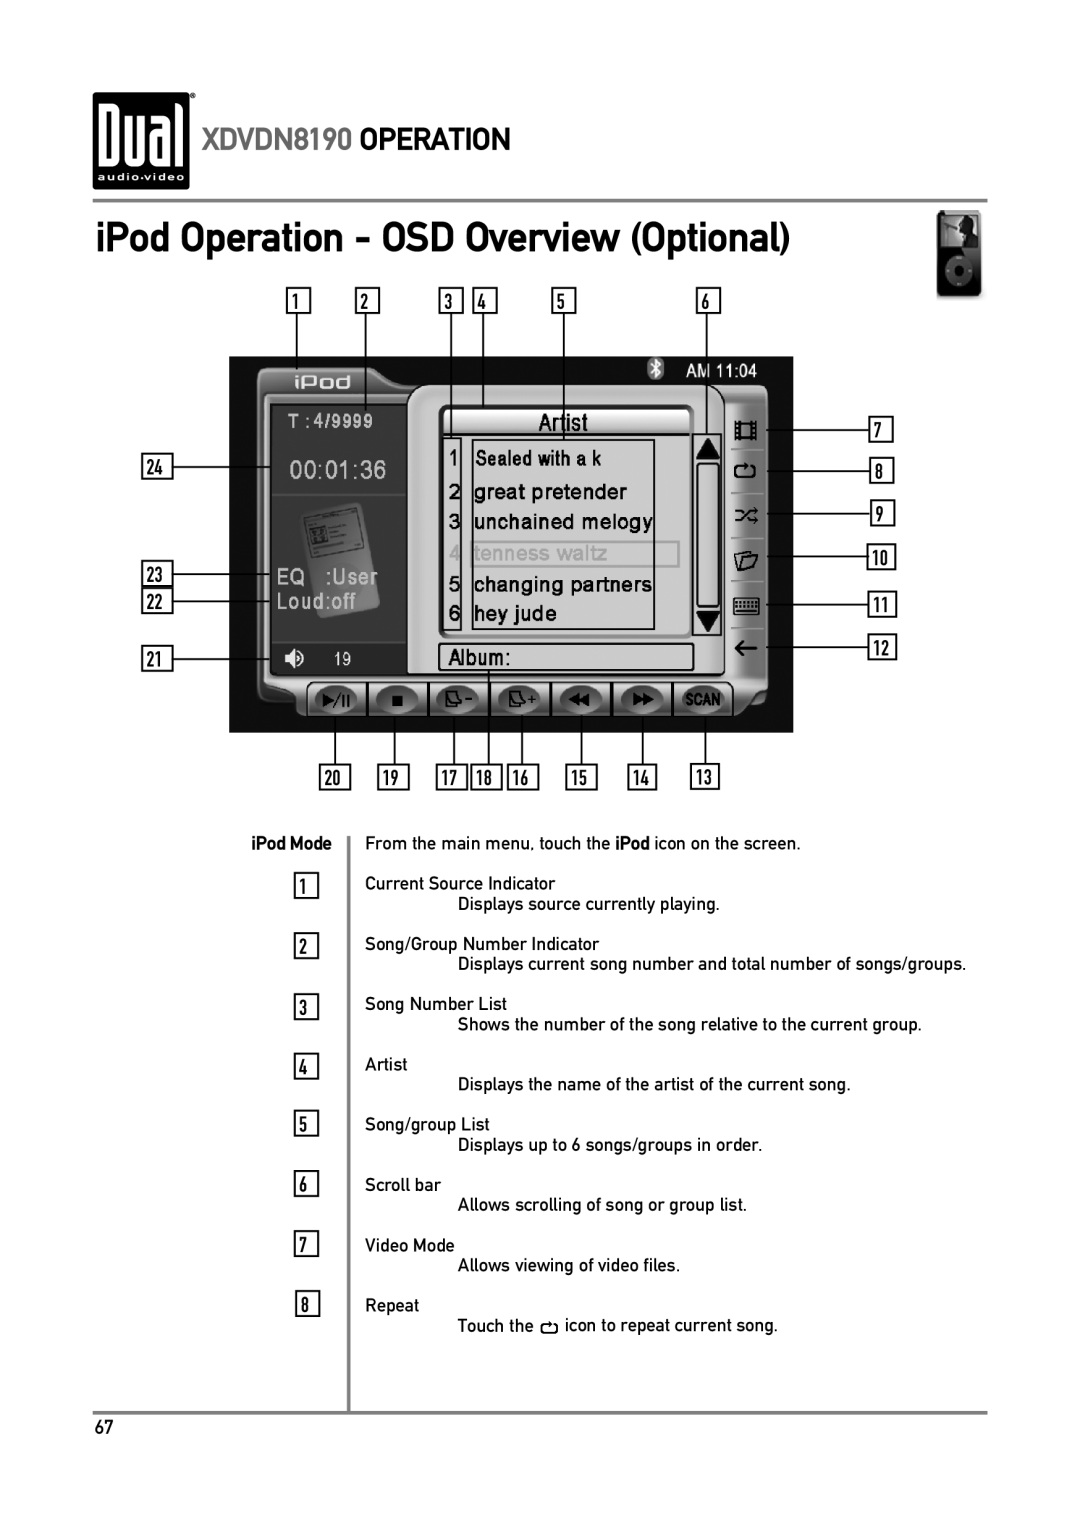 Dual owner manual iPod Operation - OSD Overview Optional, XDVDN8190 OPERATION, iPod Mode 